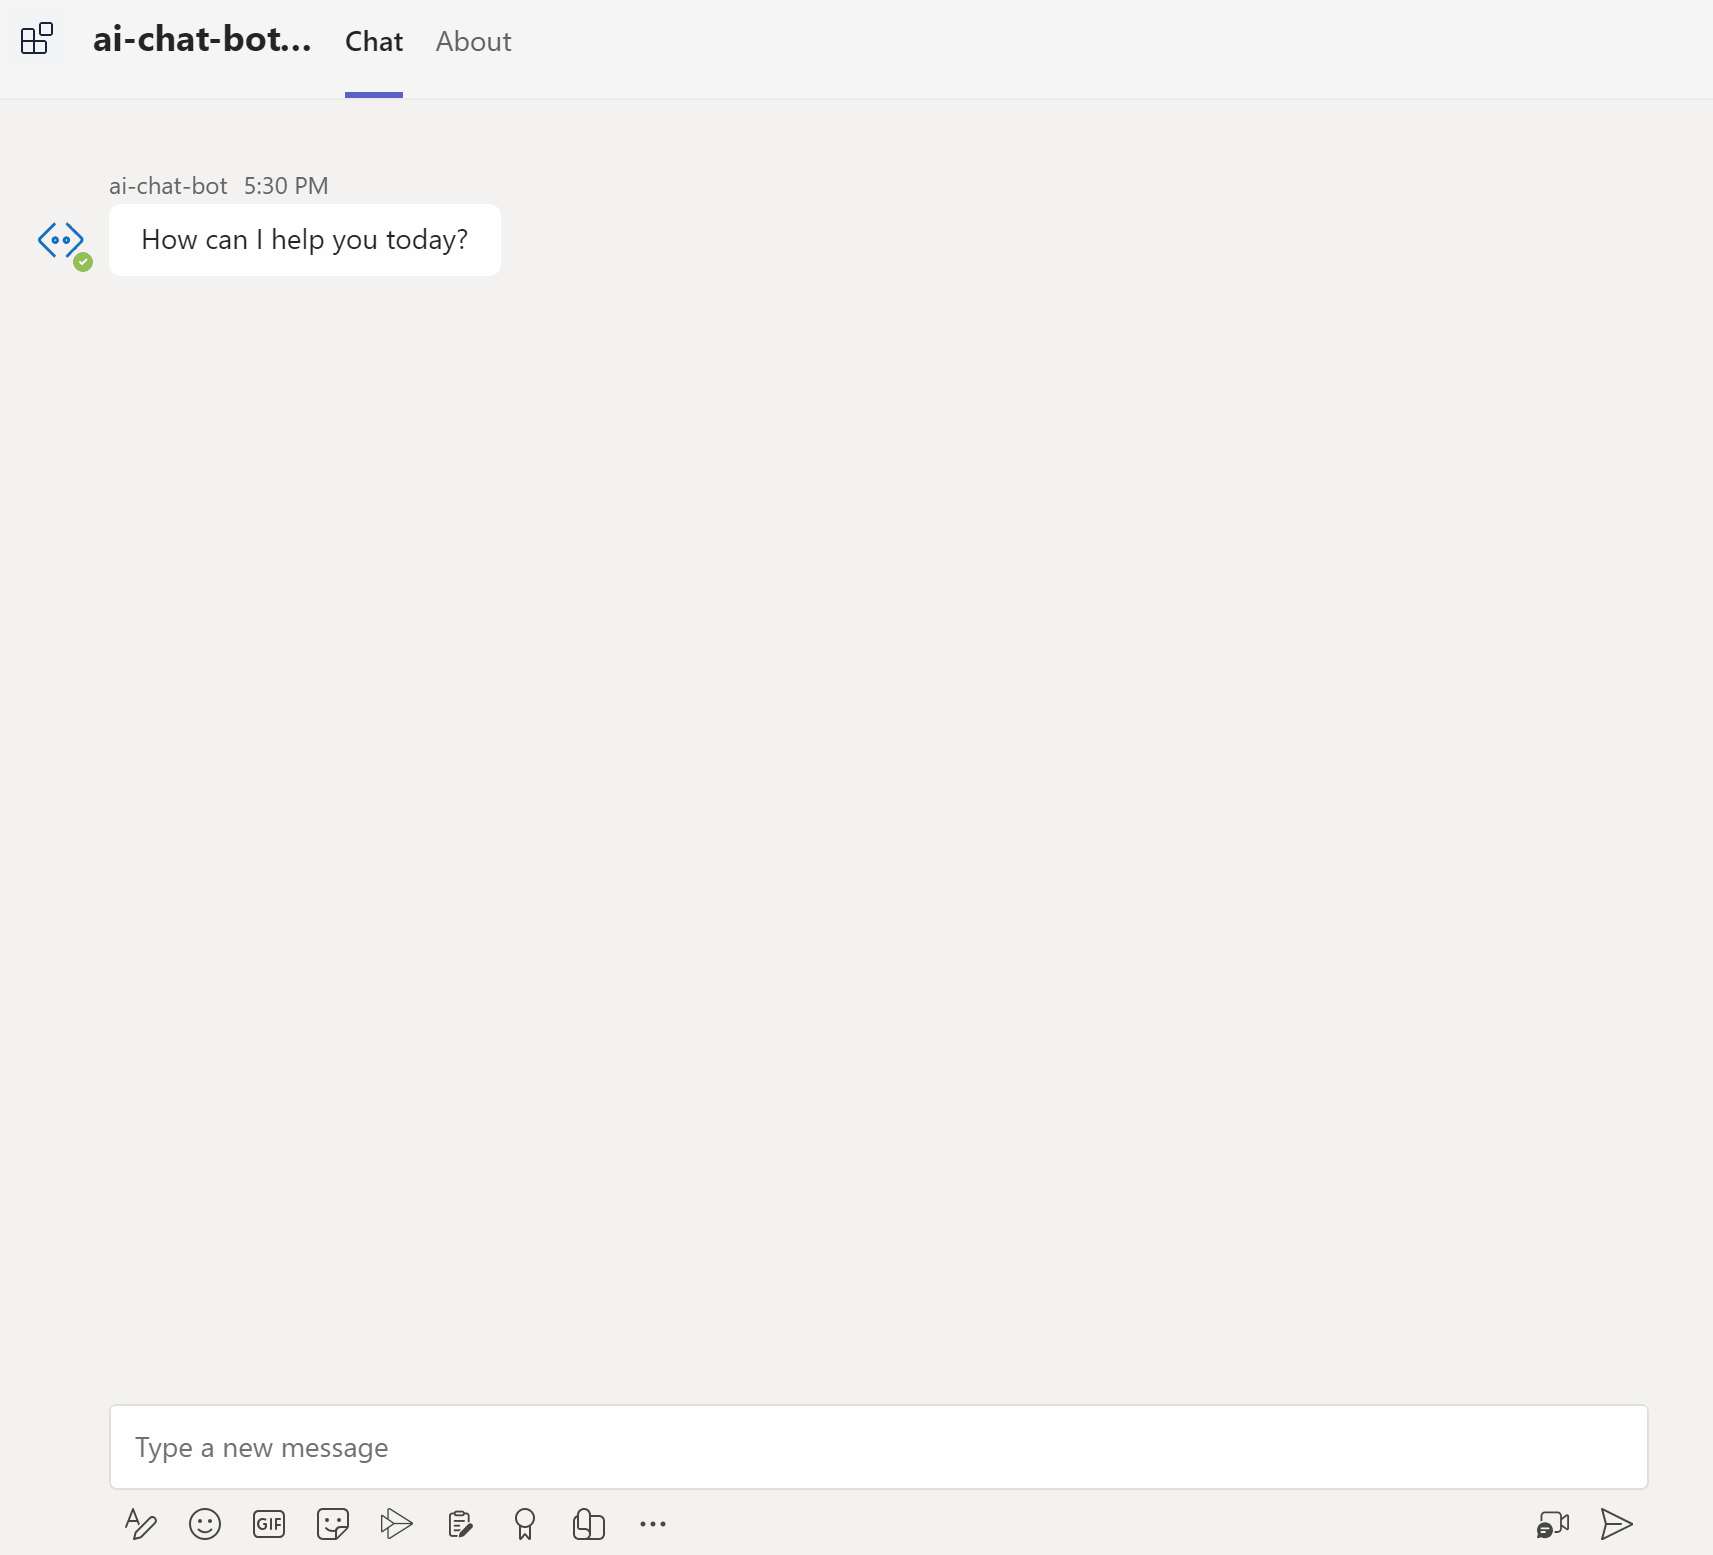 Here is a GIF showing the AI chat cot app running in Microsoft Teams